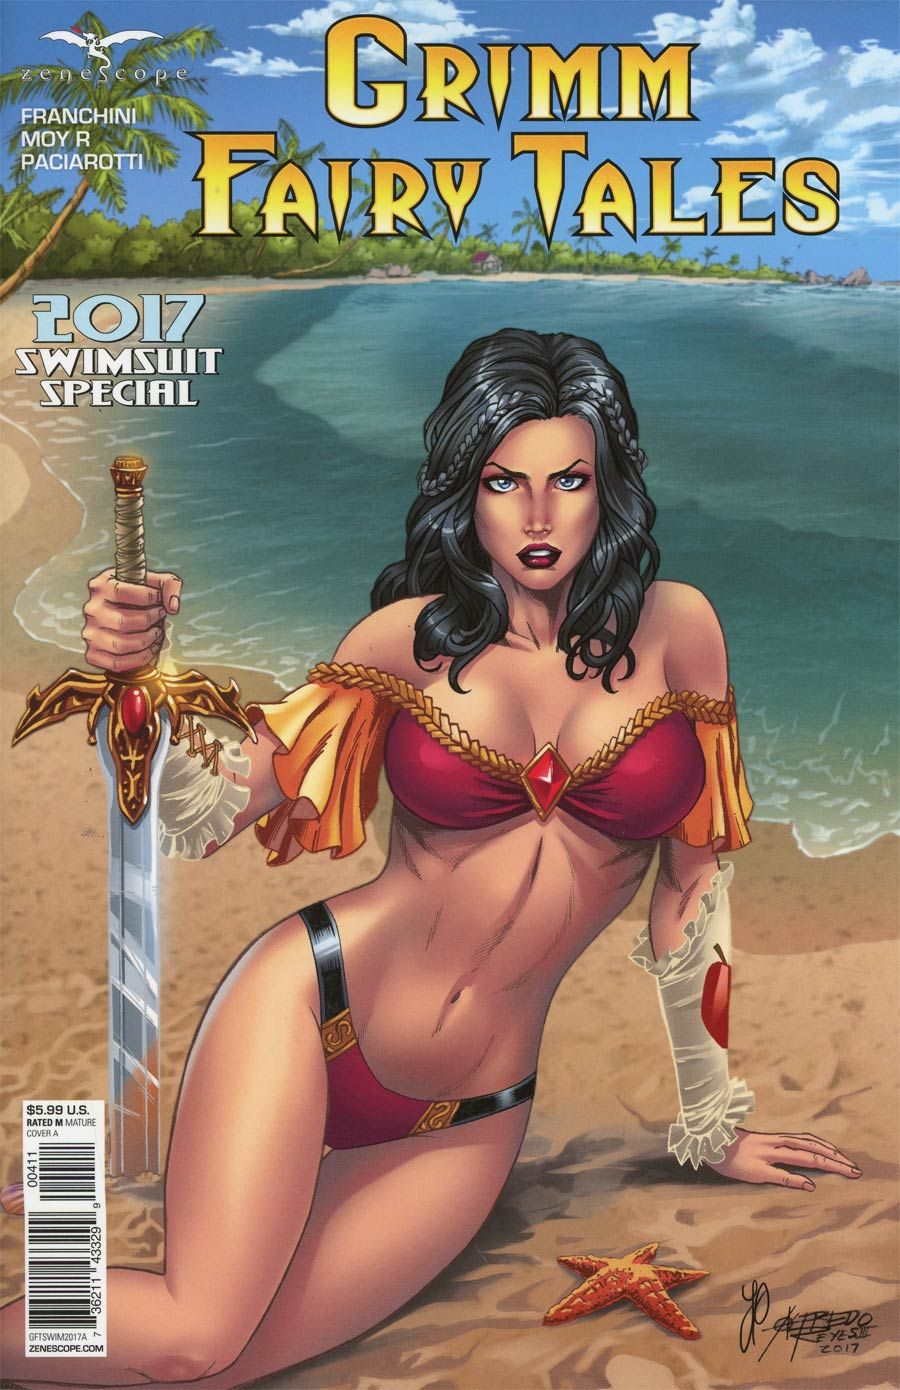 Grimm Fairy Tales: Swimsuit Edition #2017 Comic